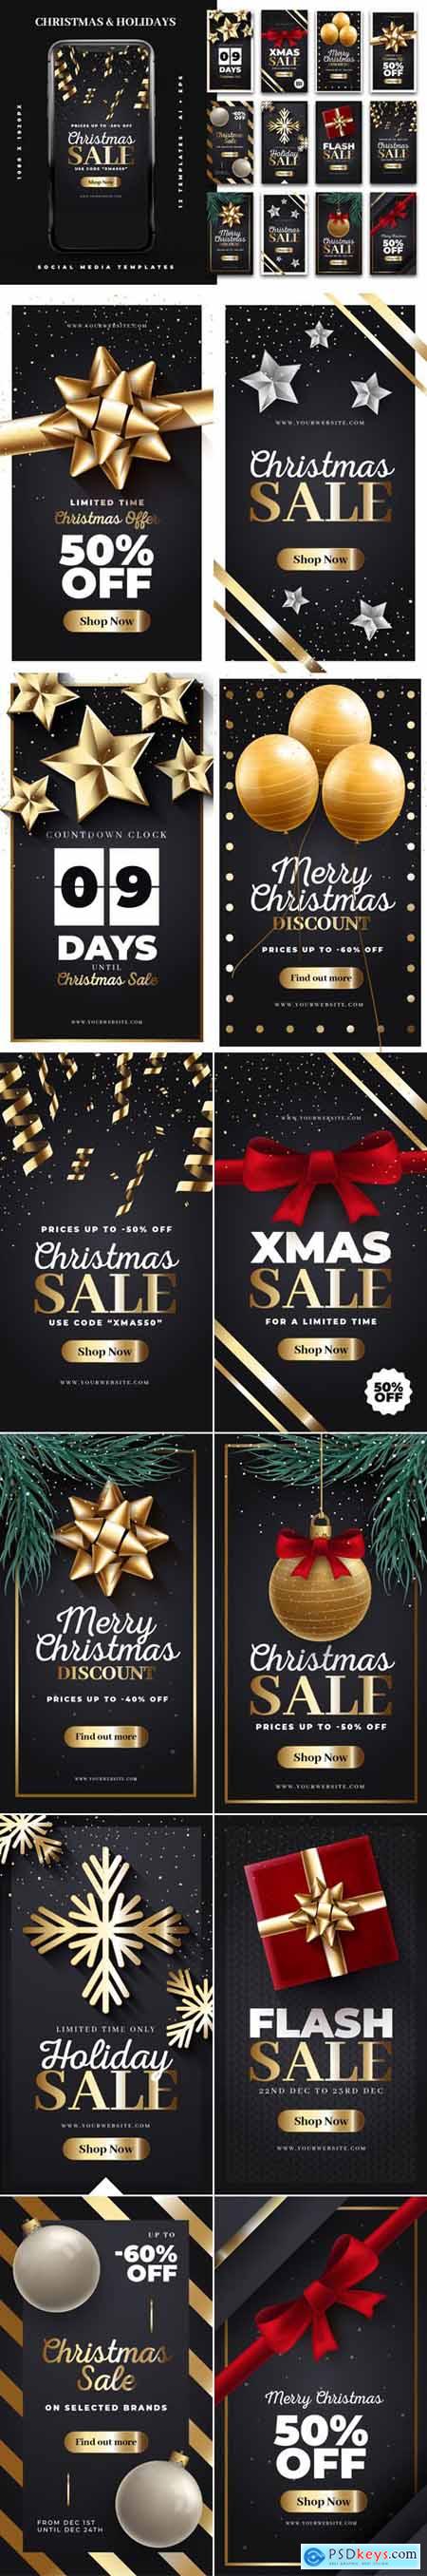 12 Holiday Instagram Story Vector Templates